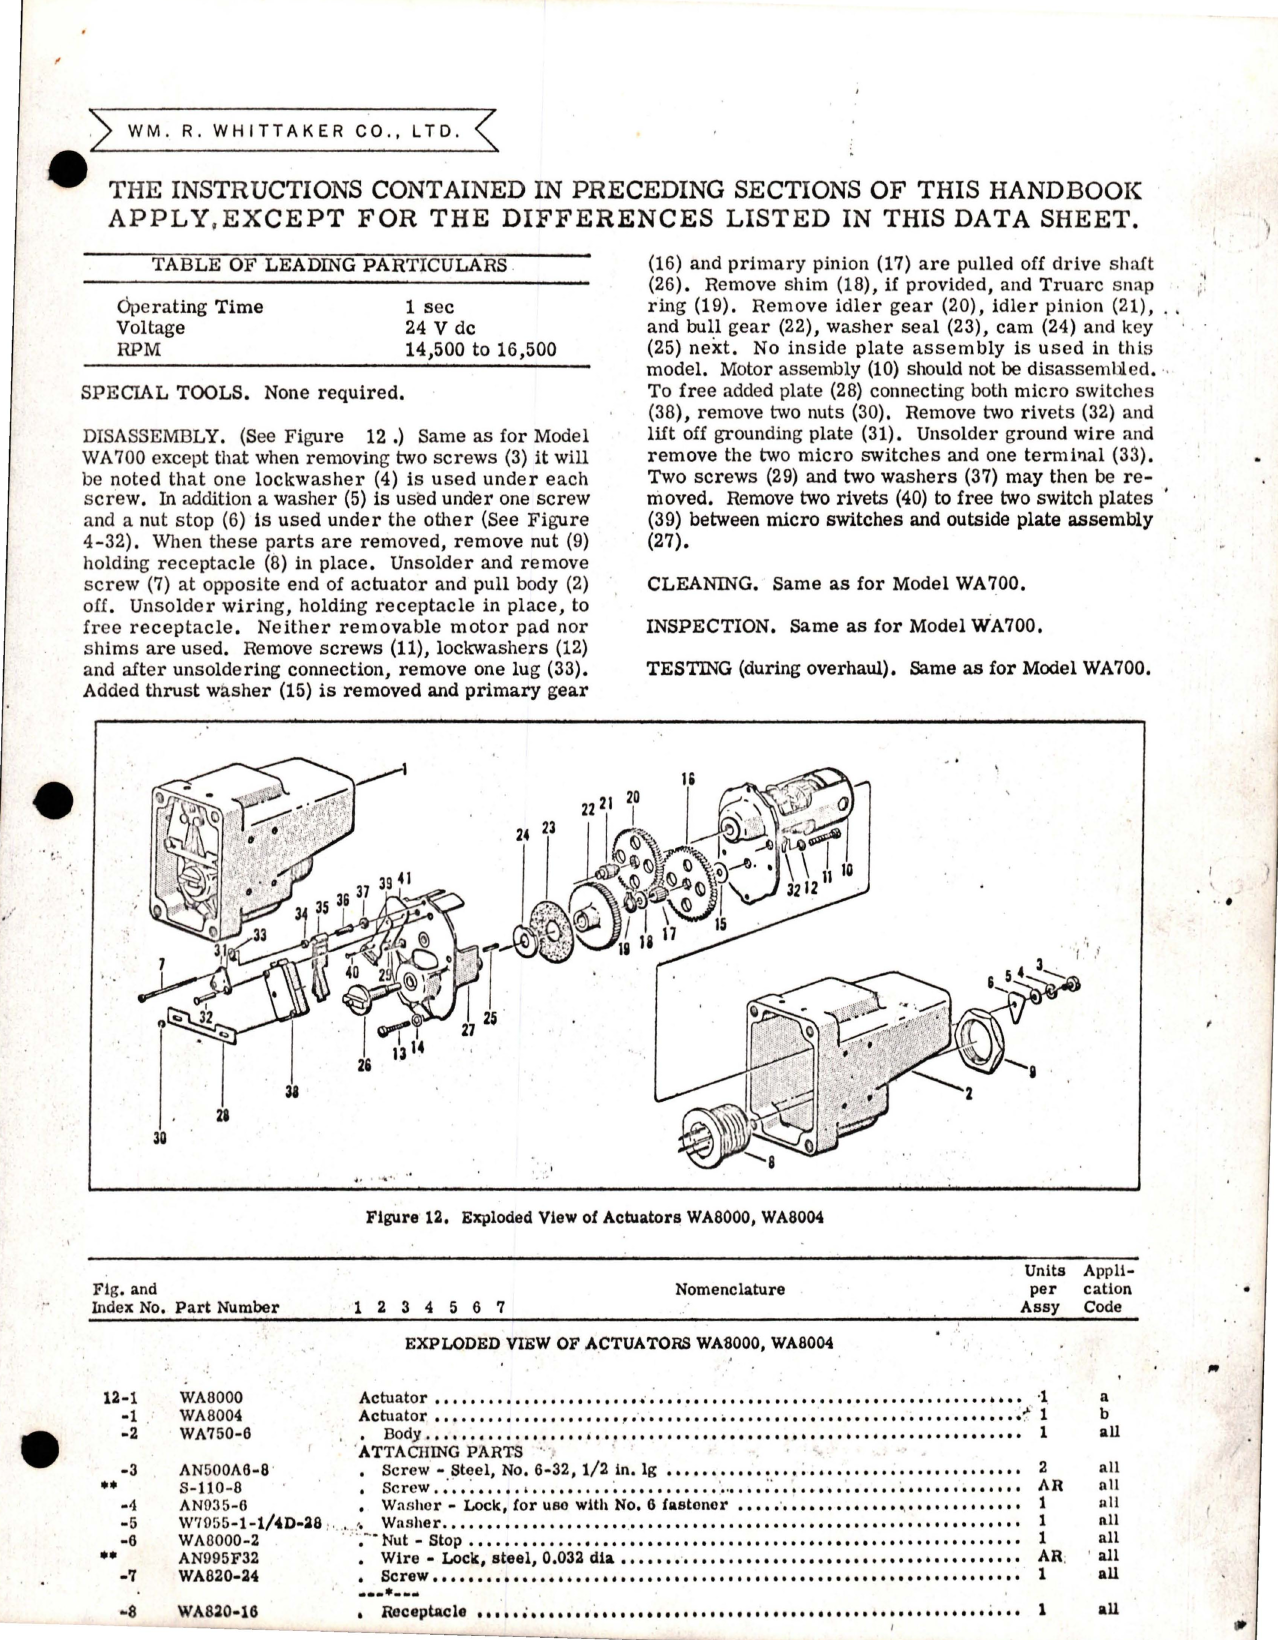 Sample page 5 from AirCorps Library document: Overhaul with Parts Breakdown for Motor Actuated Slide Shut-Off Valve - Part WE459-1-1/4D